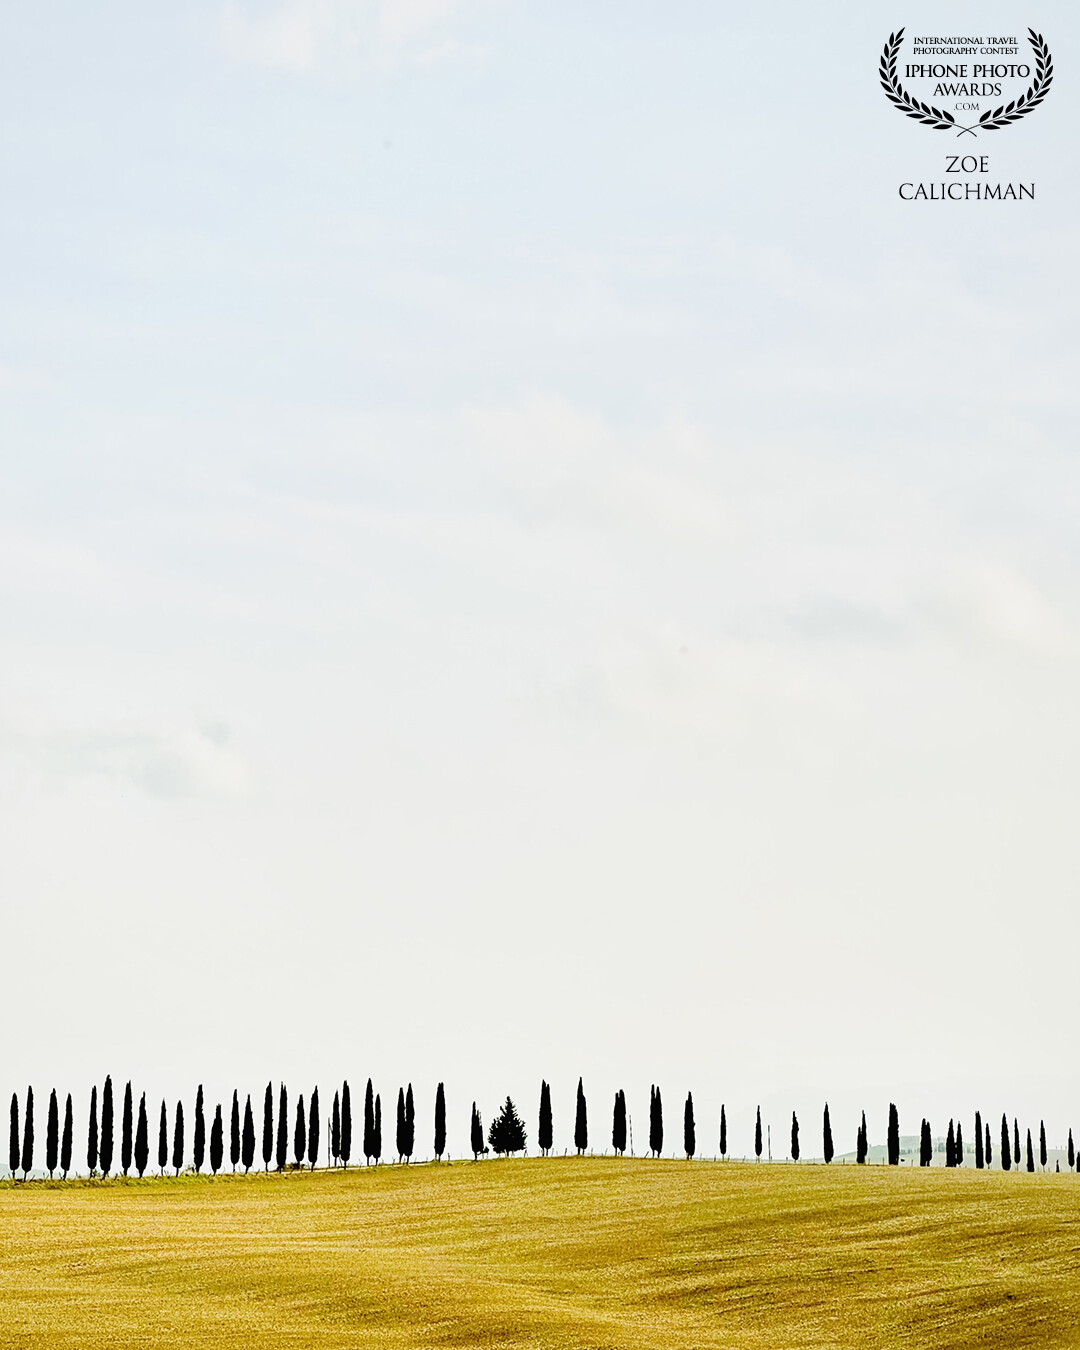 A distant dream of Tuscany. Unreal cypress trees lining the edge of the horizon. Breathless sight.